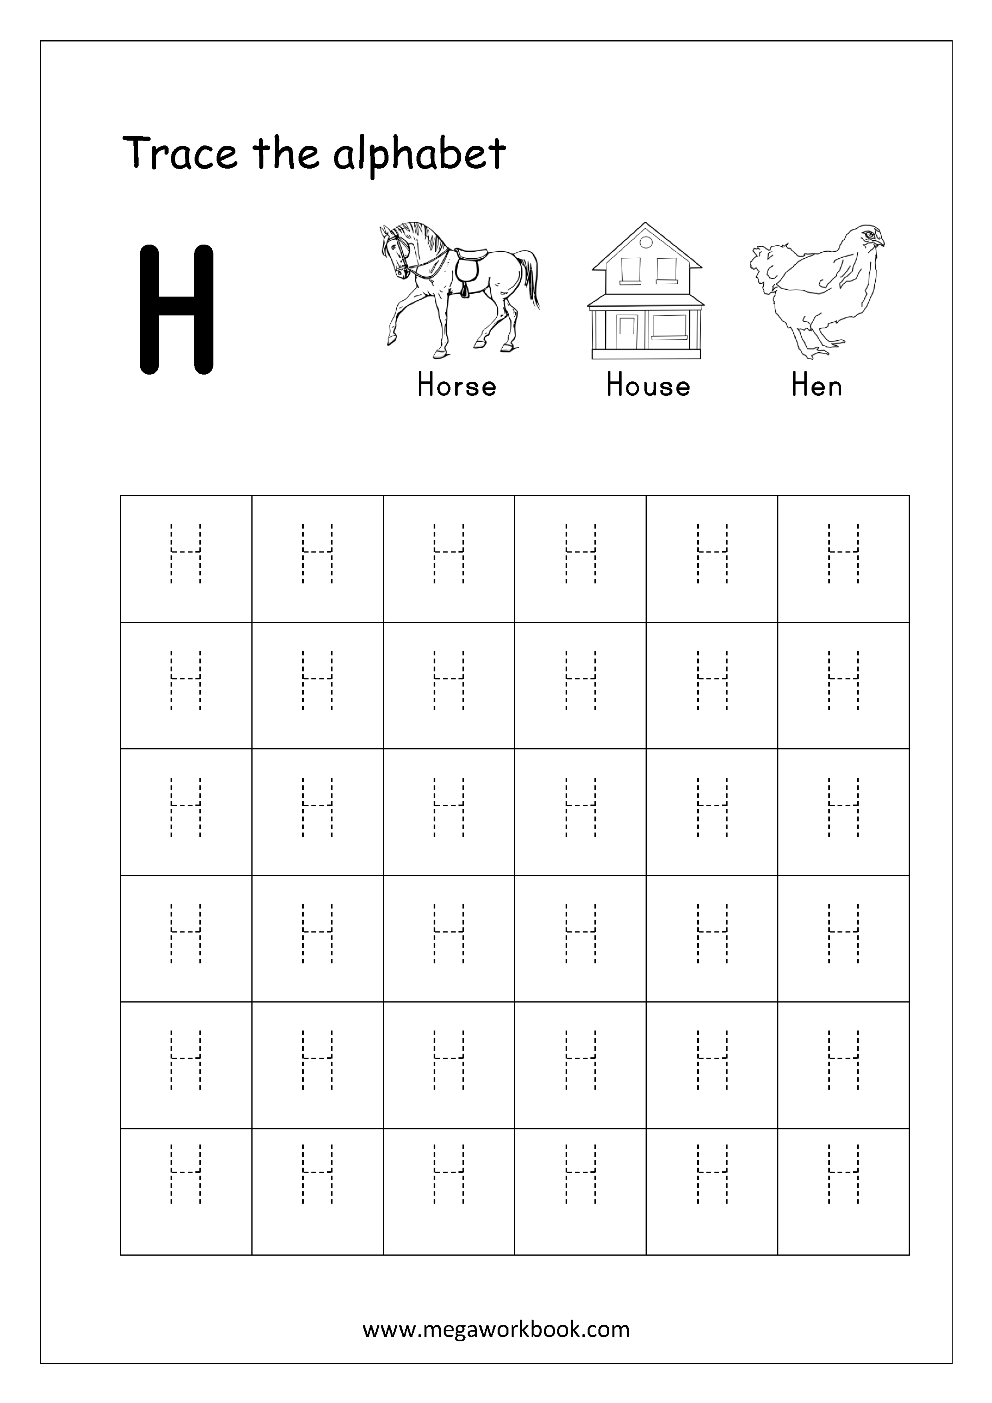 Lkg Es Worksheets Free Download Tracing Letters Alphabet within Tracing Capital Letters Worksheets Pdf